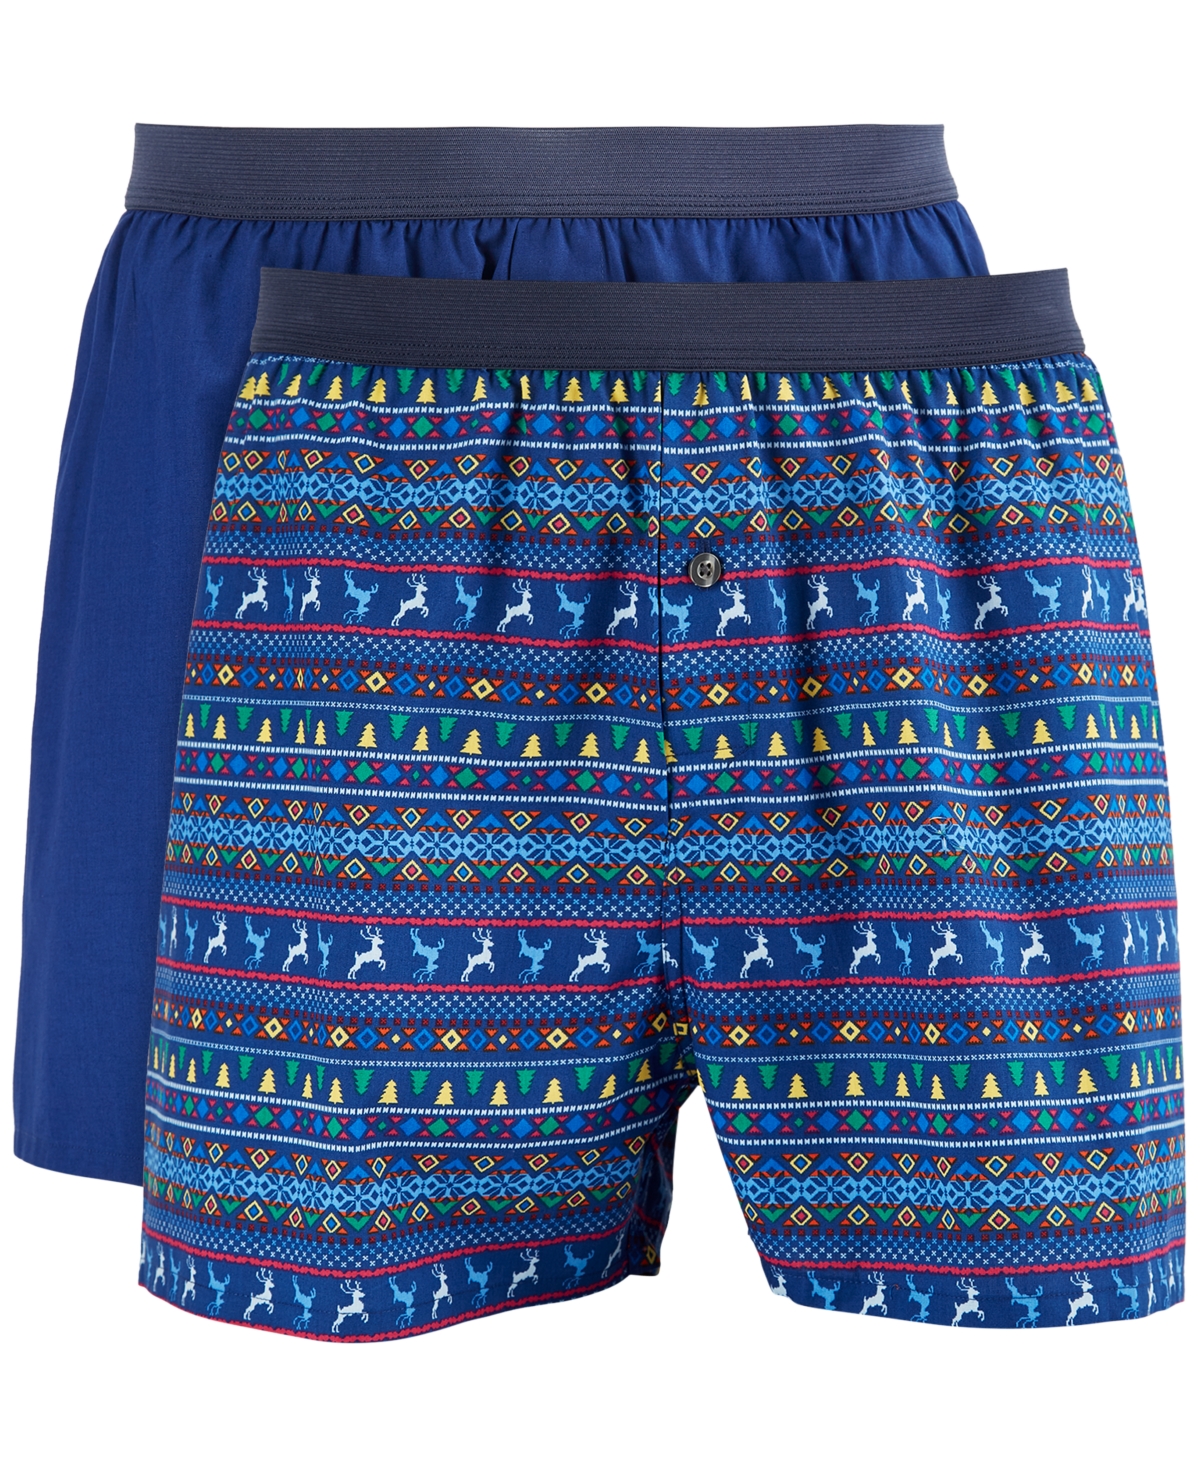 Men's 2-pk. Patterned & Solid Boxer Shorts, Created for Macy's - Navy